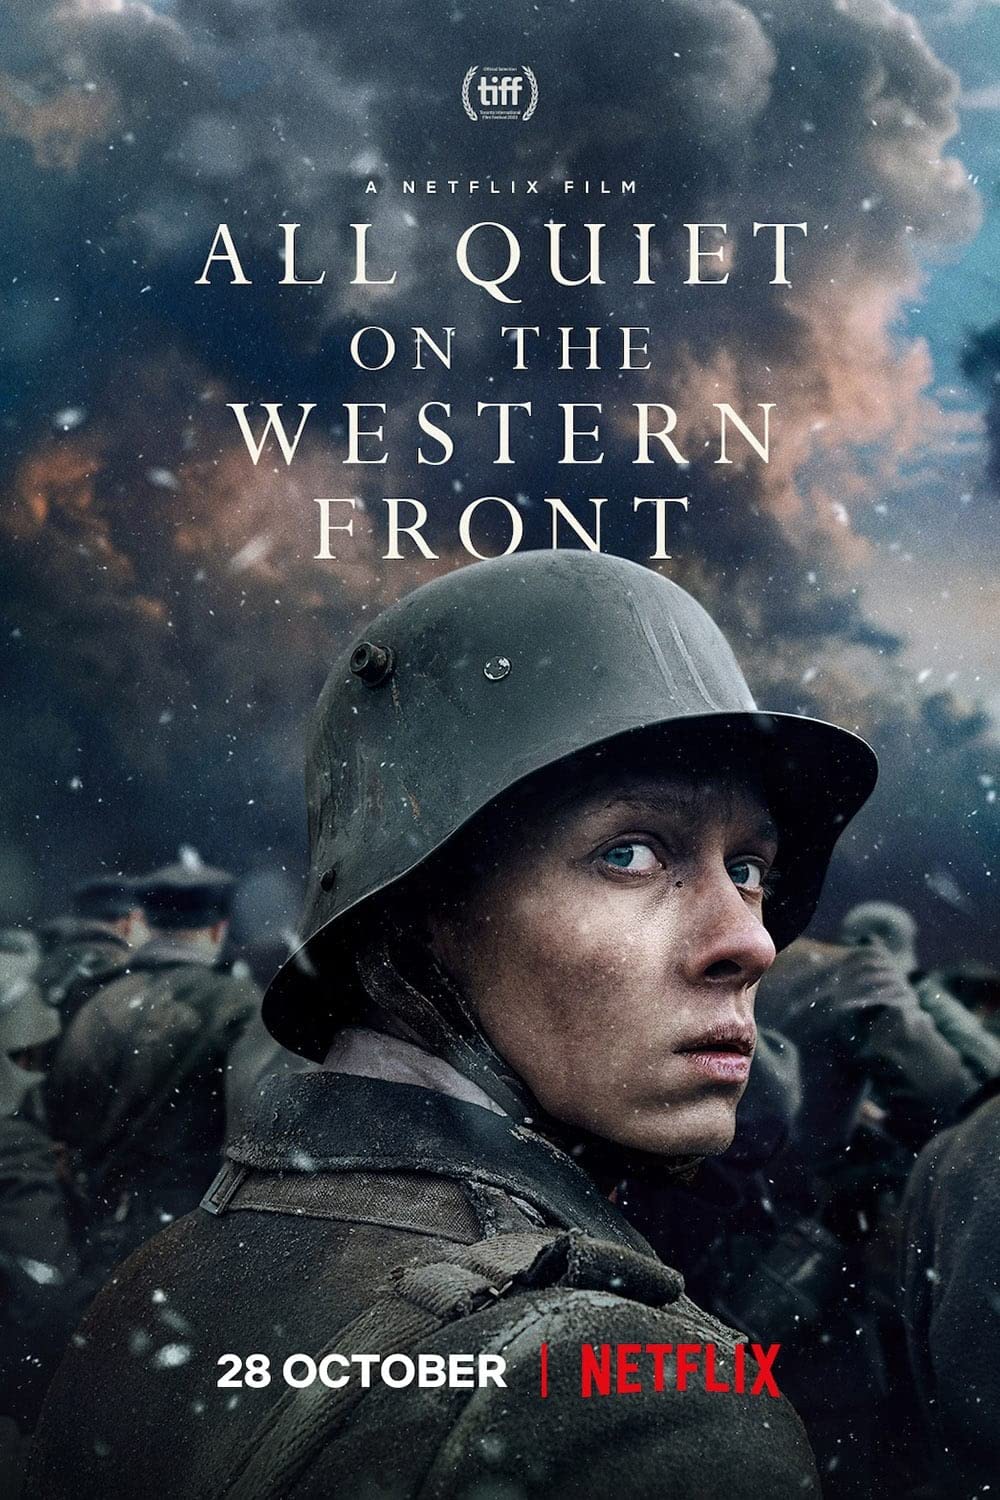 a soldier on the battlefield in the movie poster for All Quiet on the Western Front